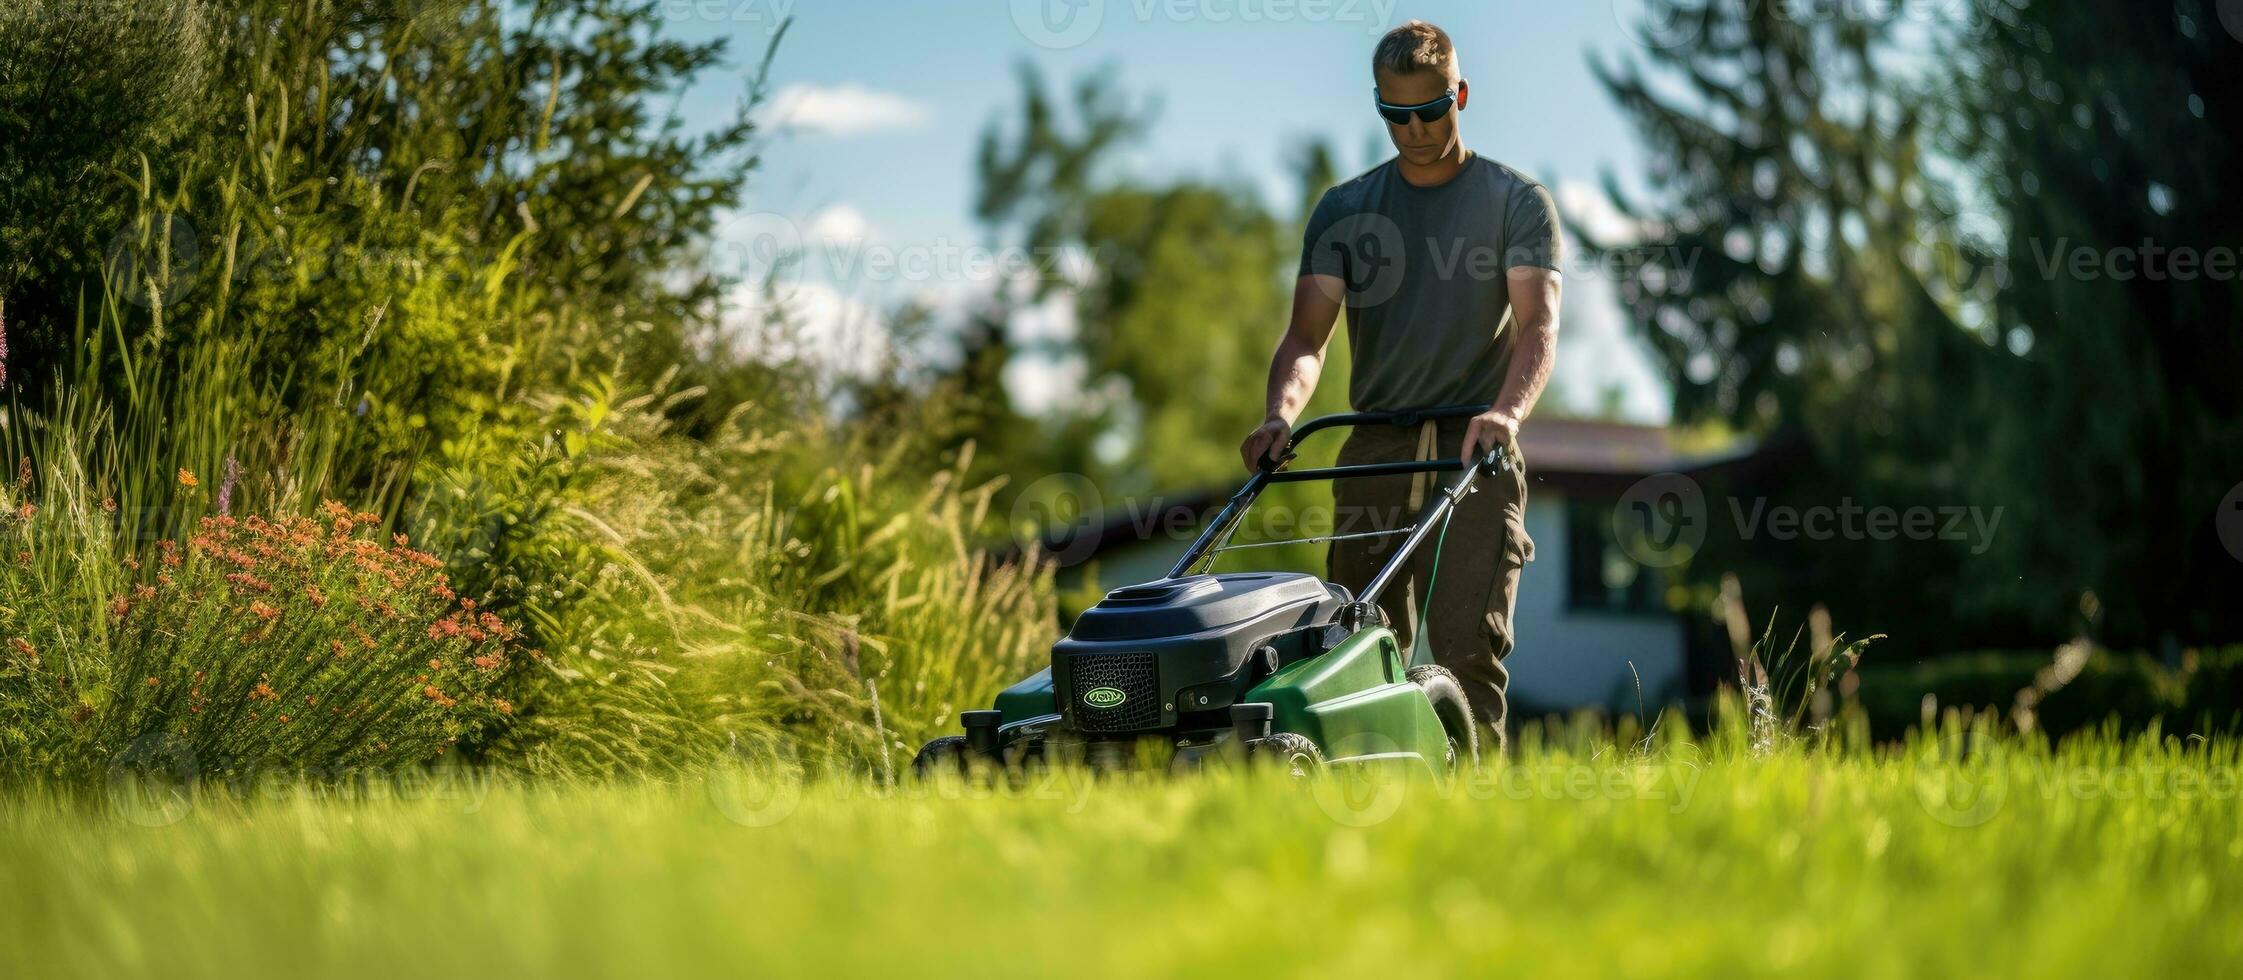 A professional gardener tends to the grass in a beautiful garden using a lawnmower photo